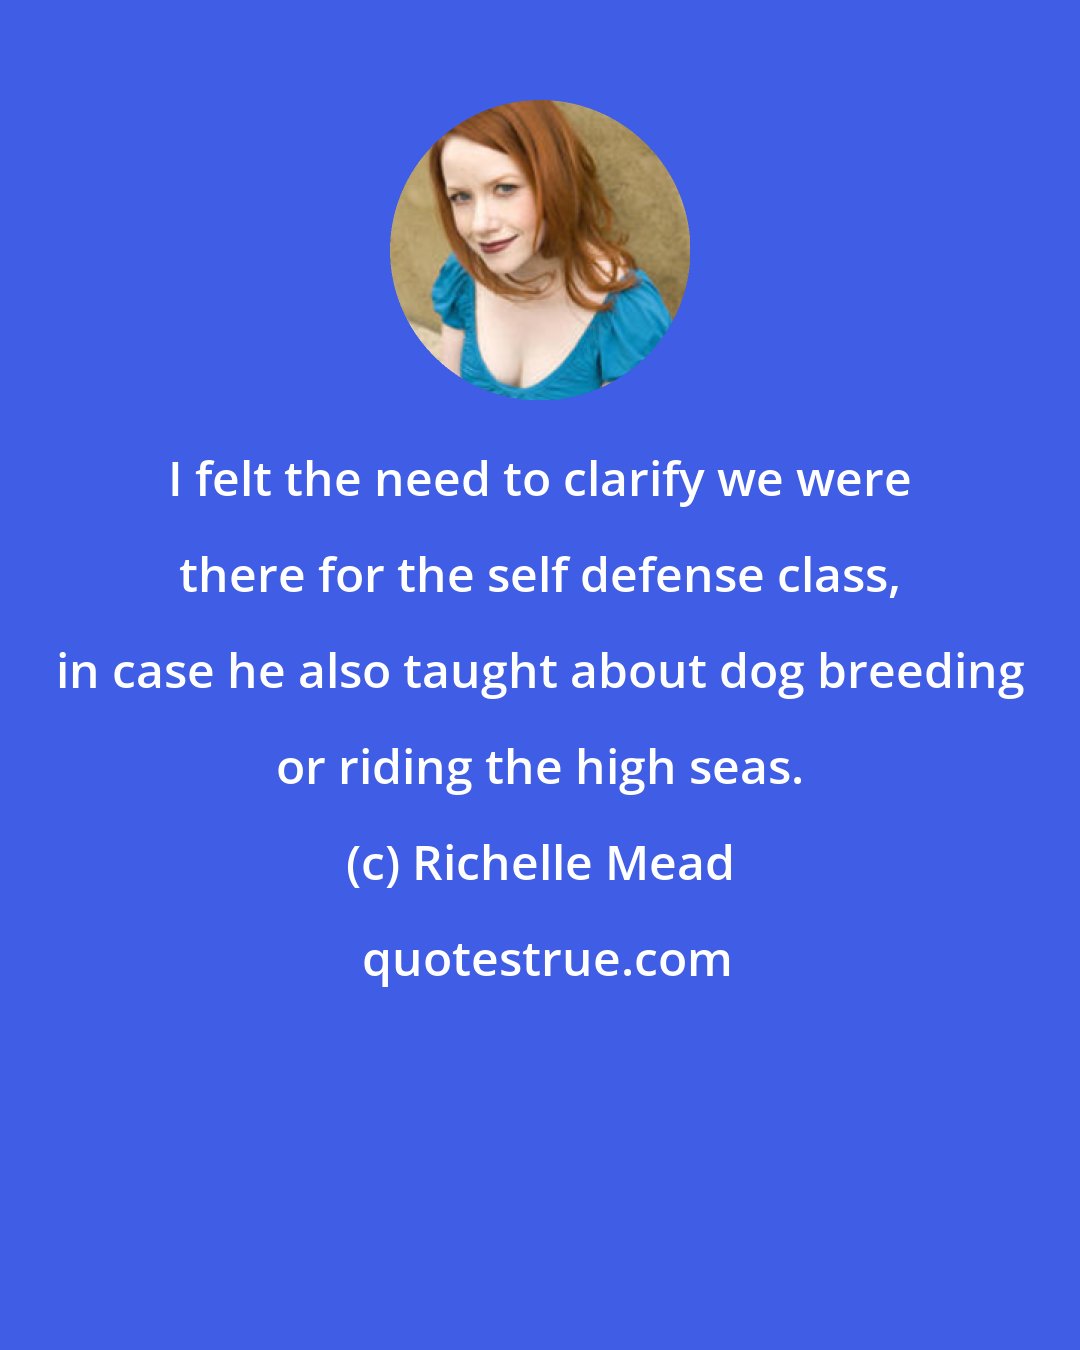 Richelle Mead: I felt the need to clarify we were there for the self defense class, in case he also taught about dog breeding or riding the high seas.